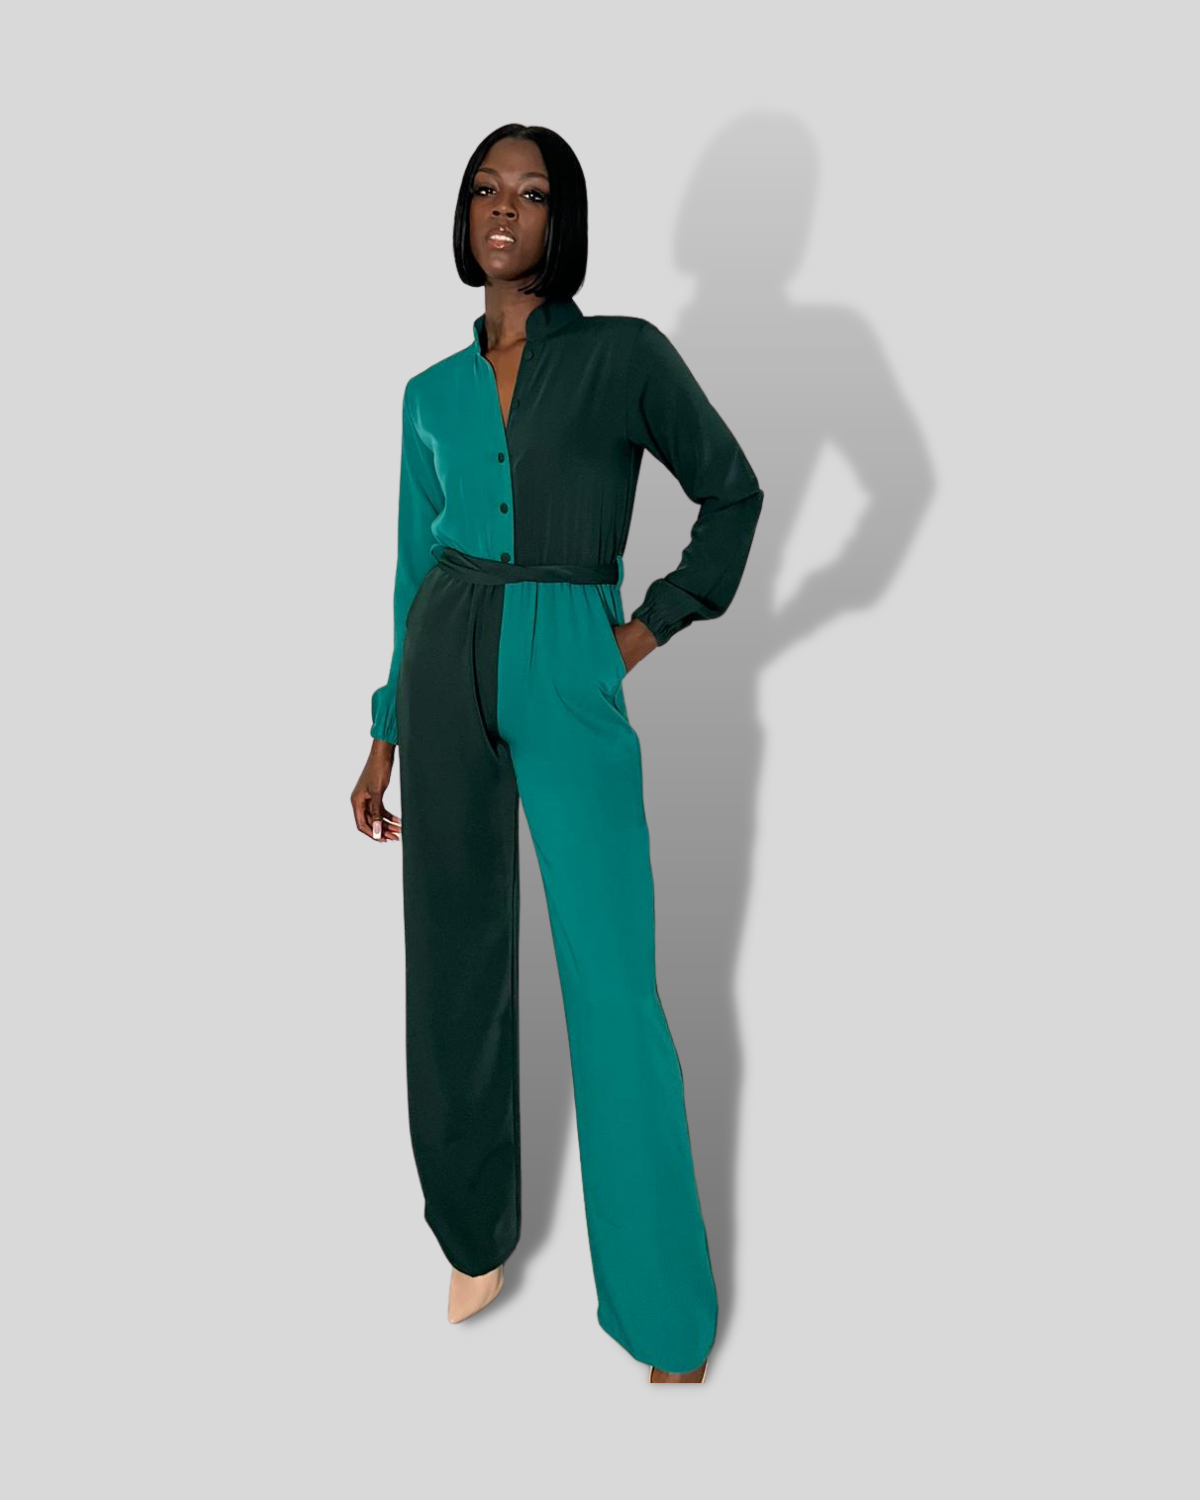 Dellez Tall Fashion Try-On Haul  STAND-OUT Dressy Clothes for